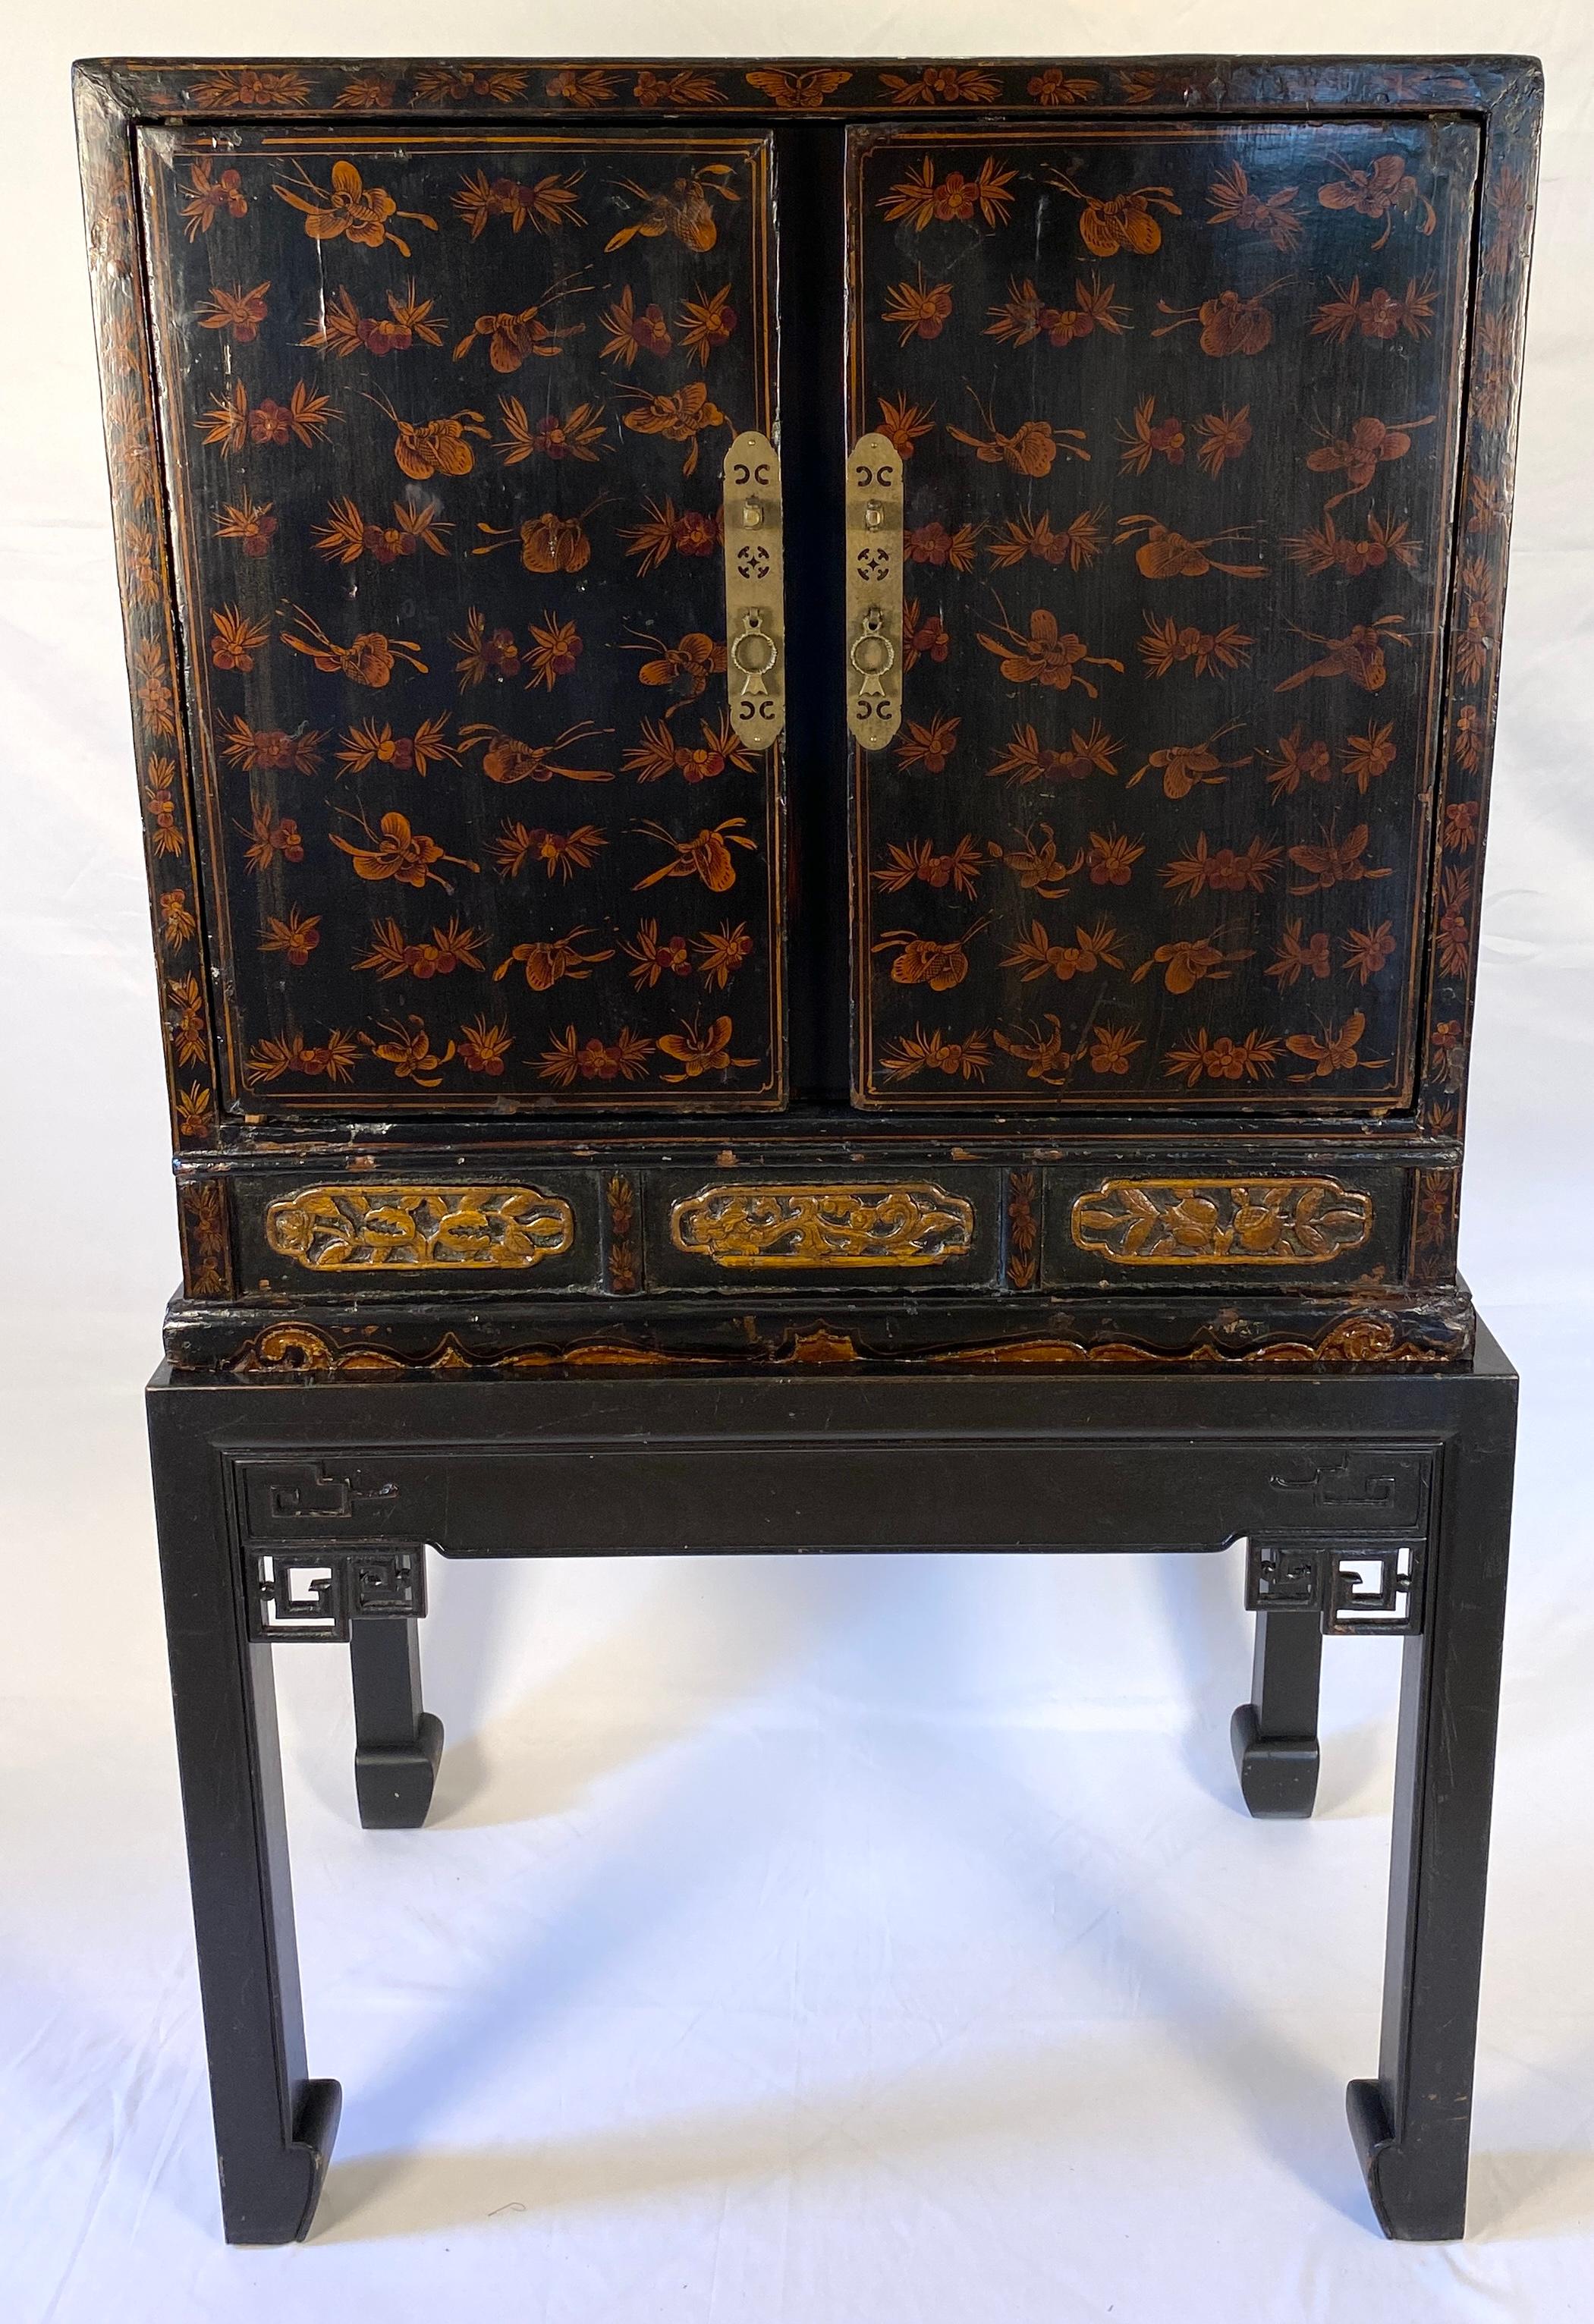 Chinese Red Lacquered Qing Dynasty 19th Century Dry Bar Cabinet im Zustand „Gut“ im Angebot in Miami, FL